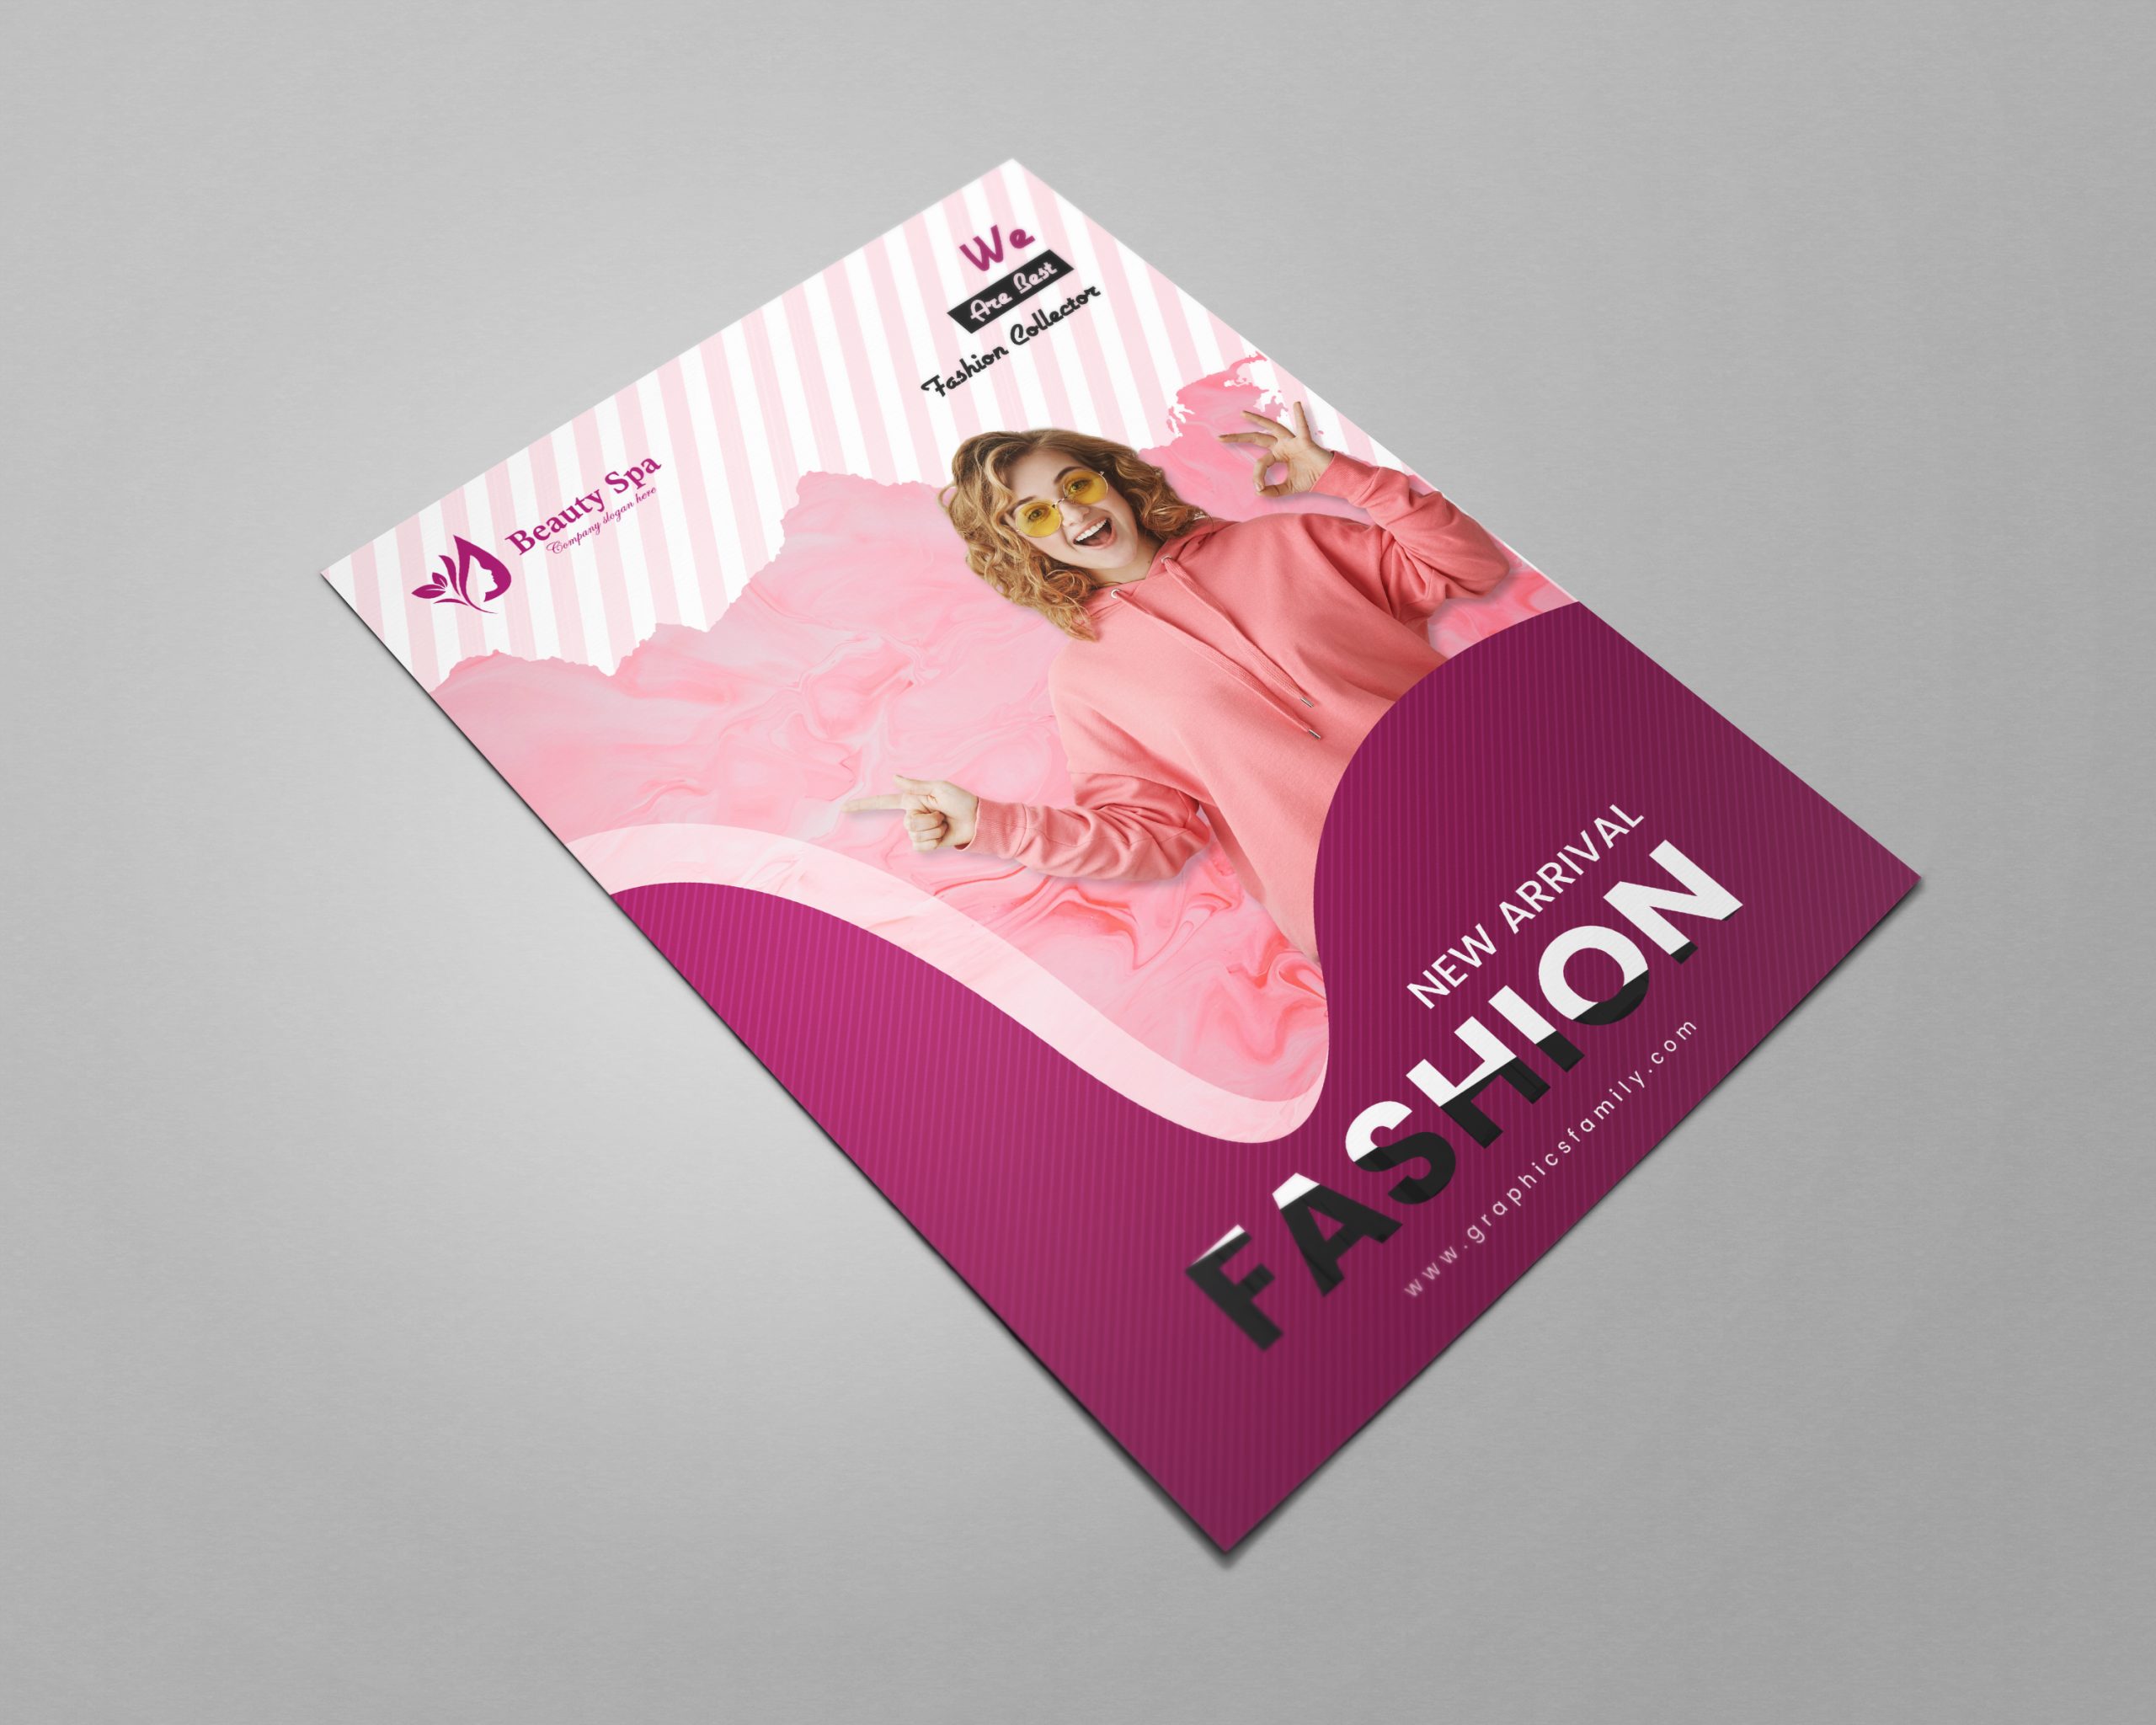 Free Fashion Flyer Design Template for Promoting Product or Event Download